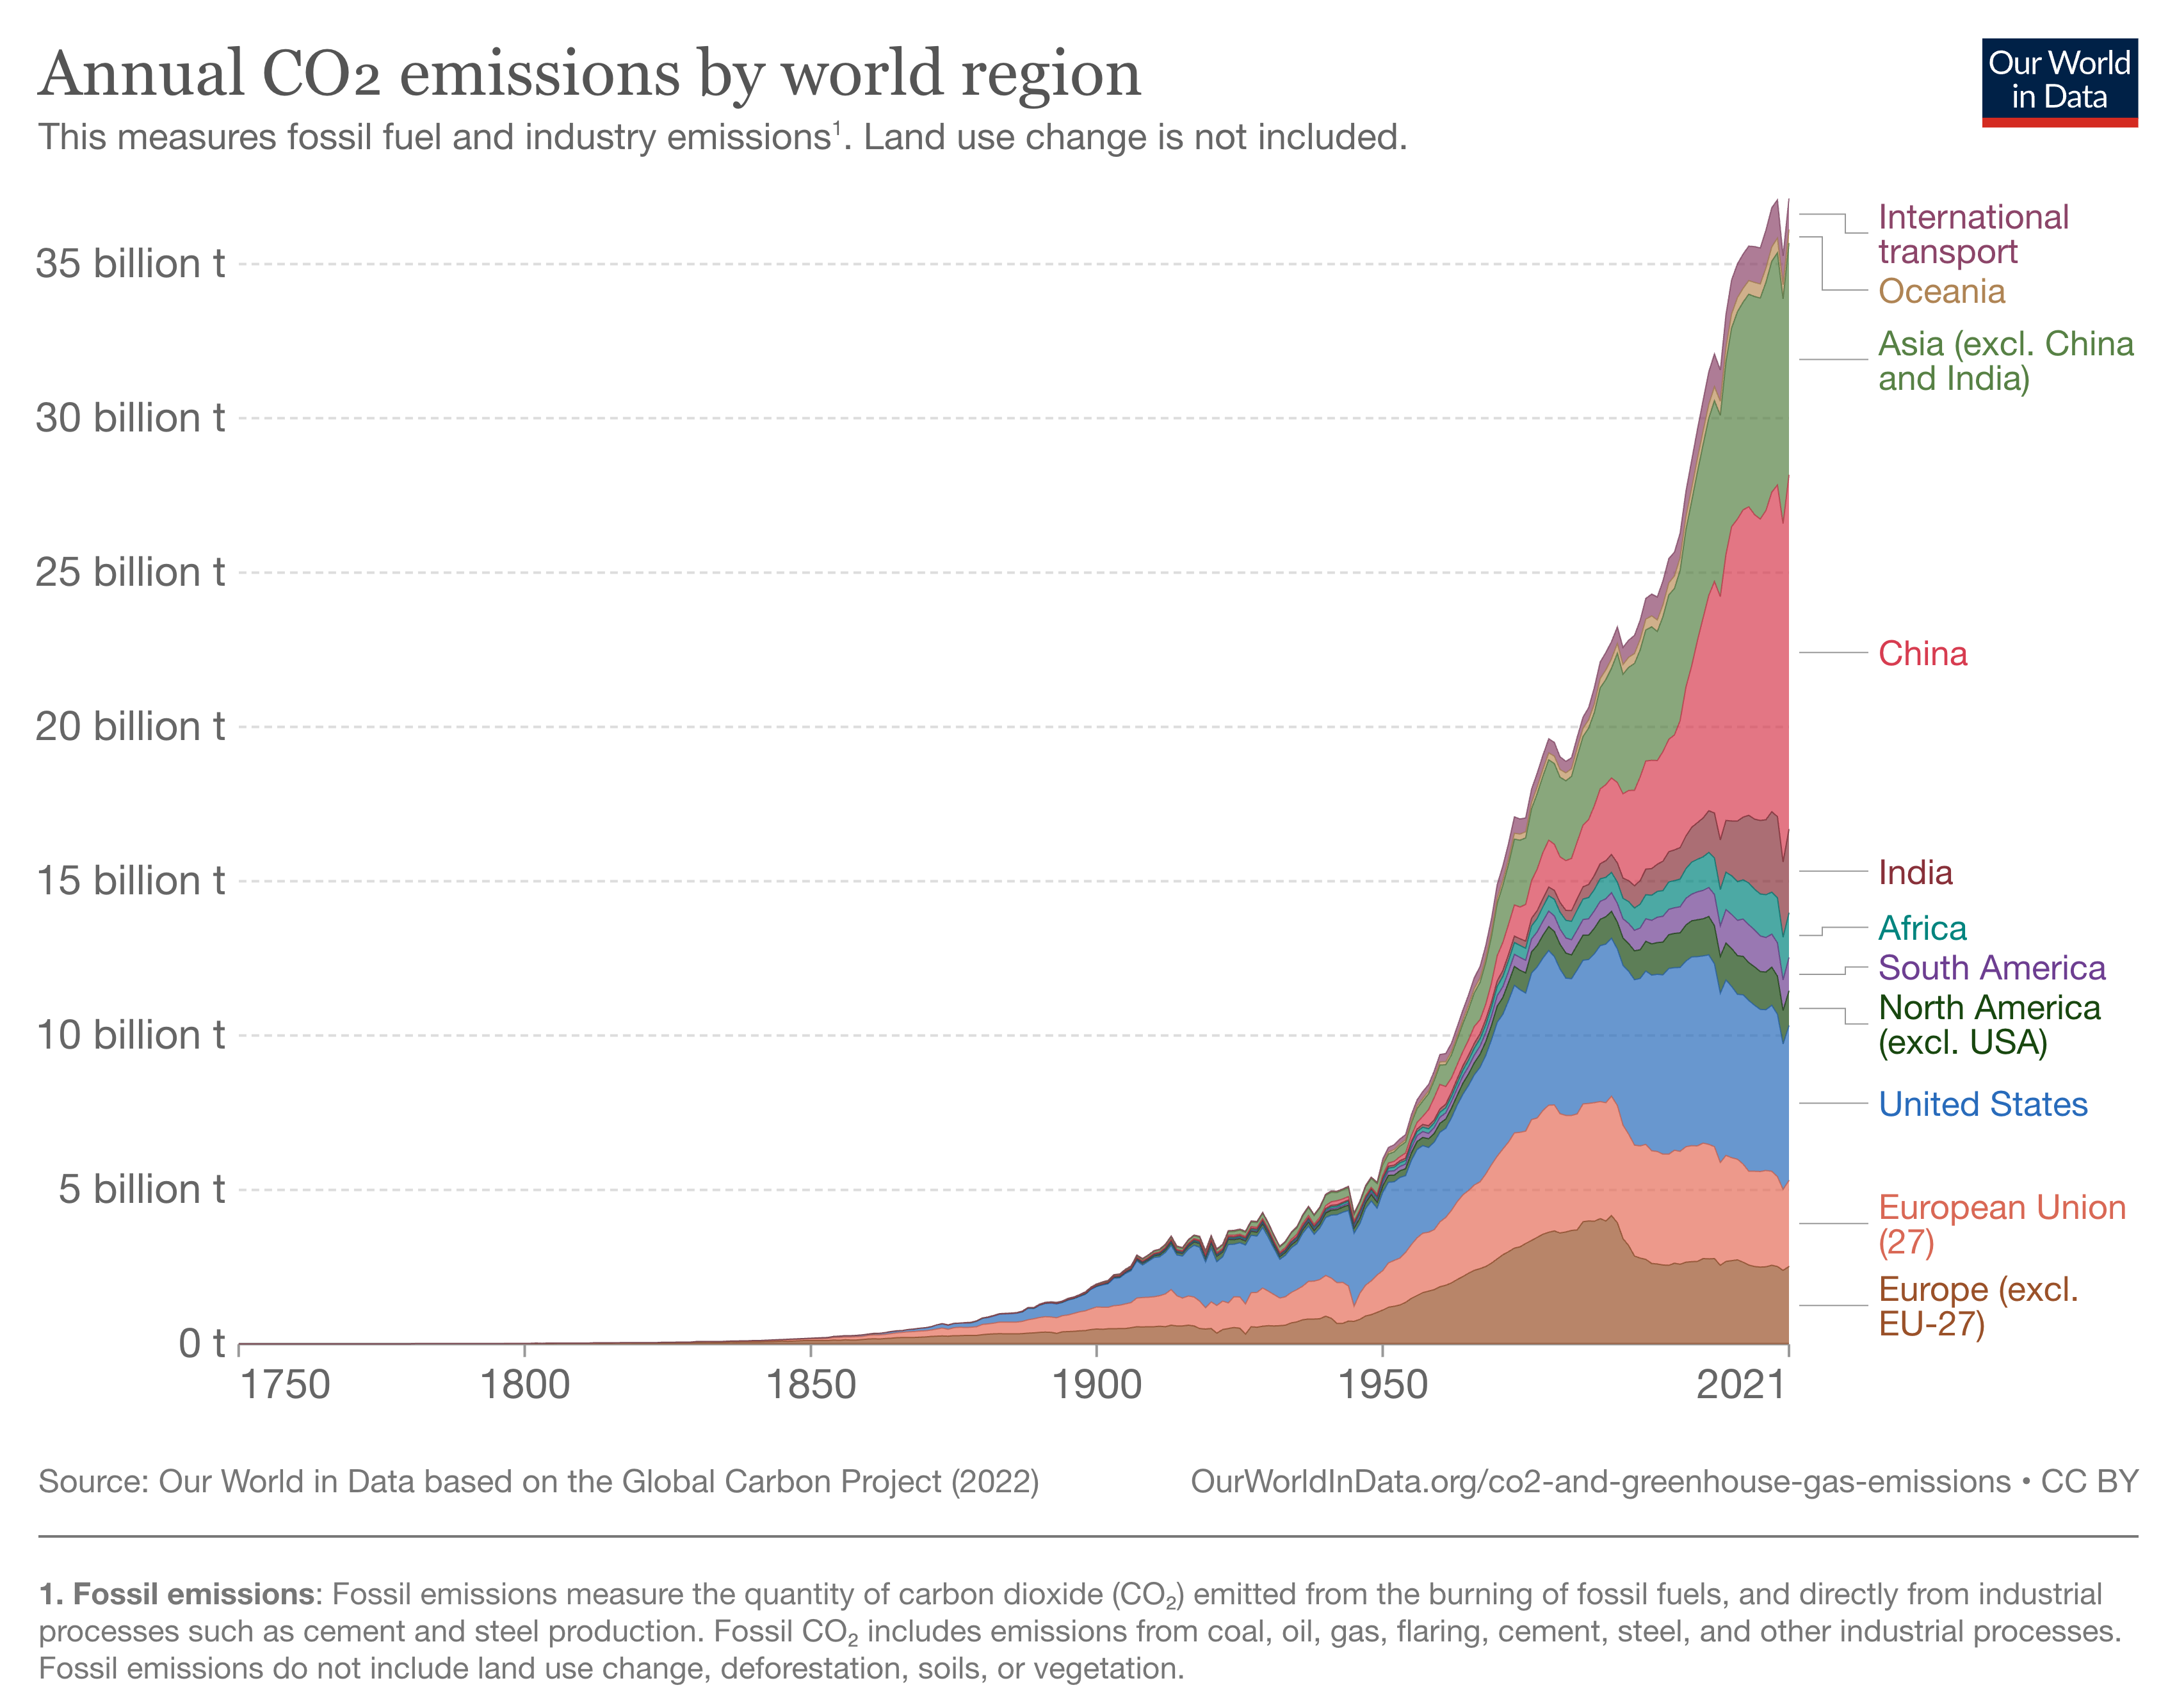 Annual fossil fuel and industry CO2 emissions by world region, emissions in Europe and North America steadily increase beginning in 1850, emissions increase exponentially in all regions around 1950 from 5 billion tons to 35 billion tons in 2021